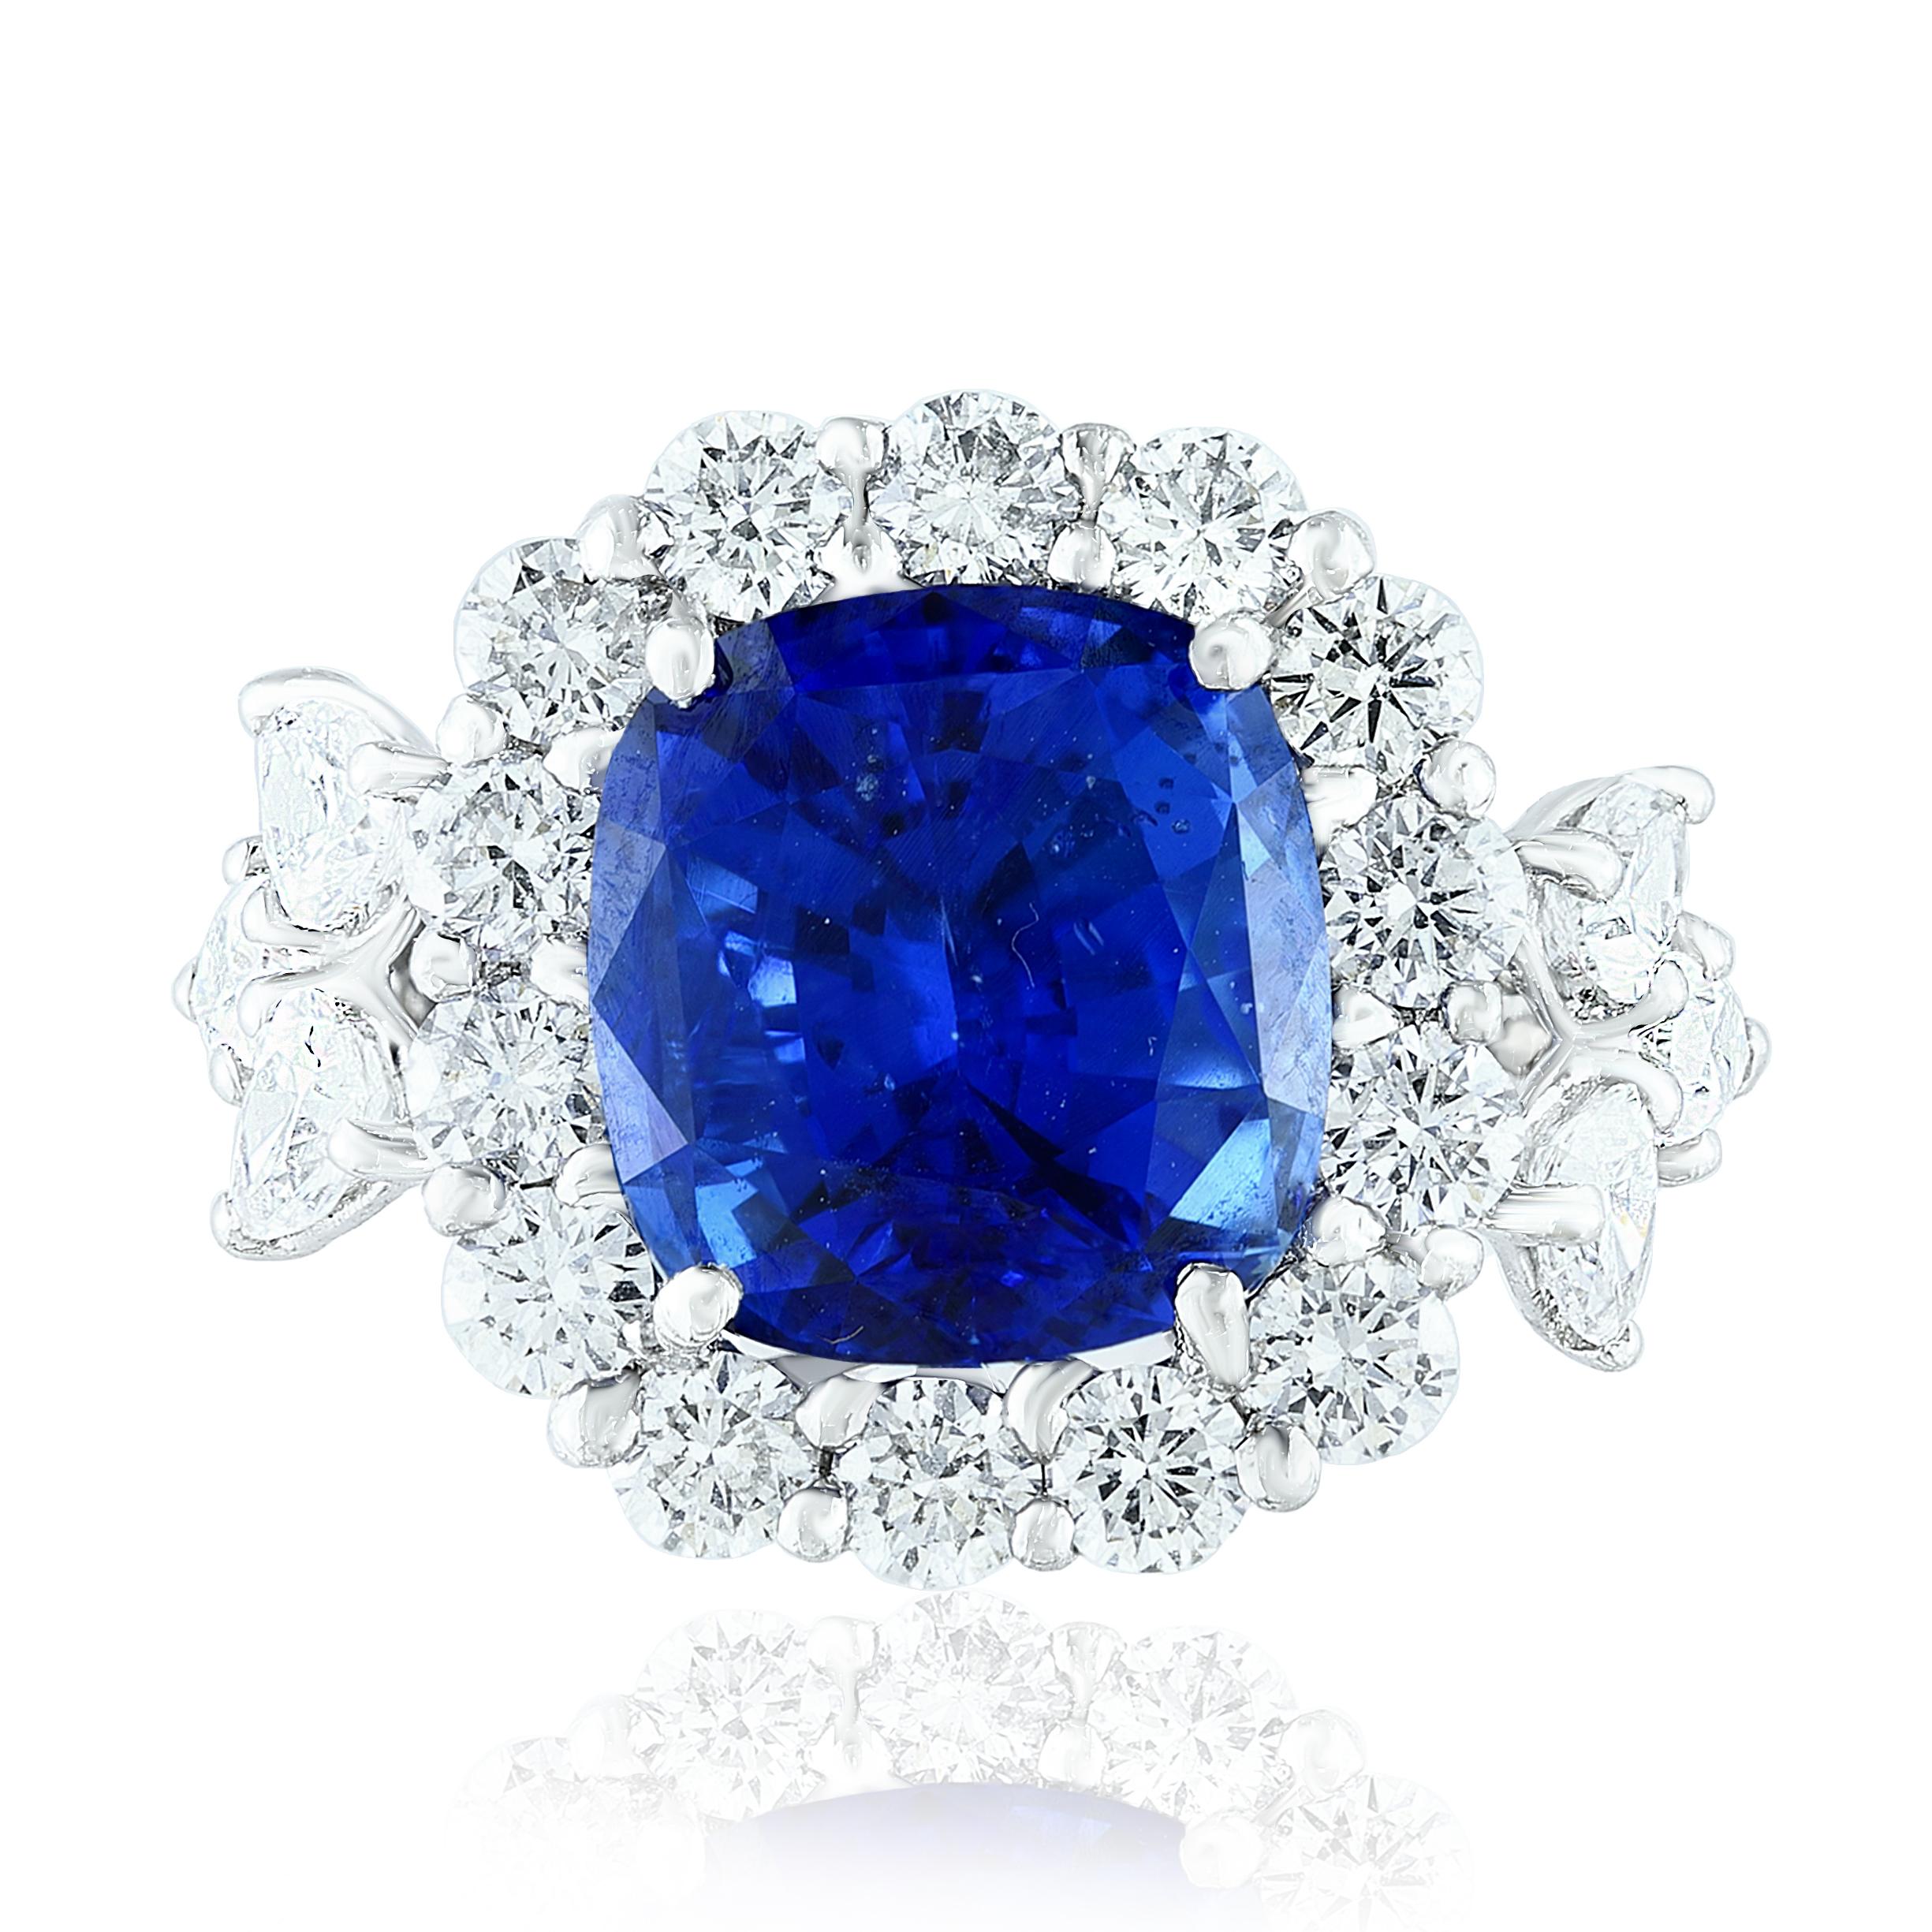 A brilliant and unique piece featuring a cushion cut Blue Sapphire and brilliant cut round and pear shape diamonds.
Blue Sapphire in the center weighs 6.61 carats total; 14 round diamonds surrounding the center stone weigh 1.72 carats total. 6 pear